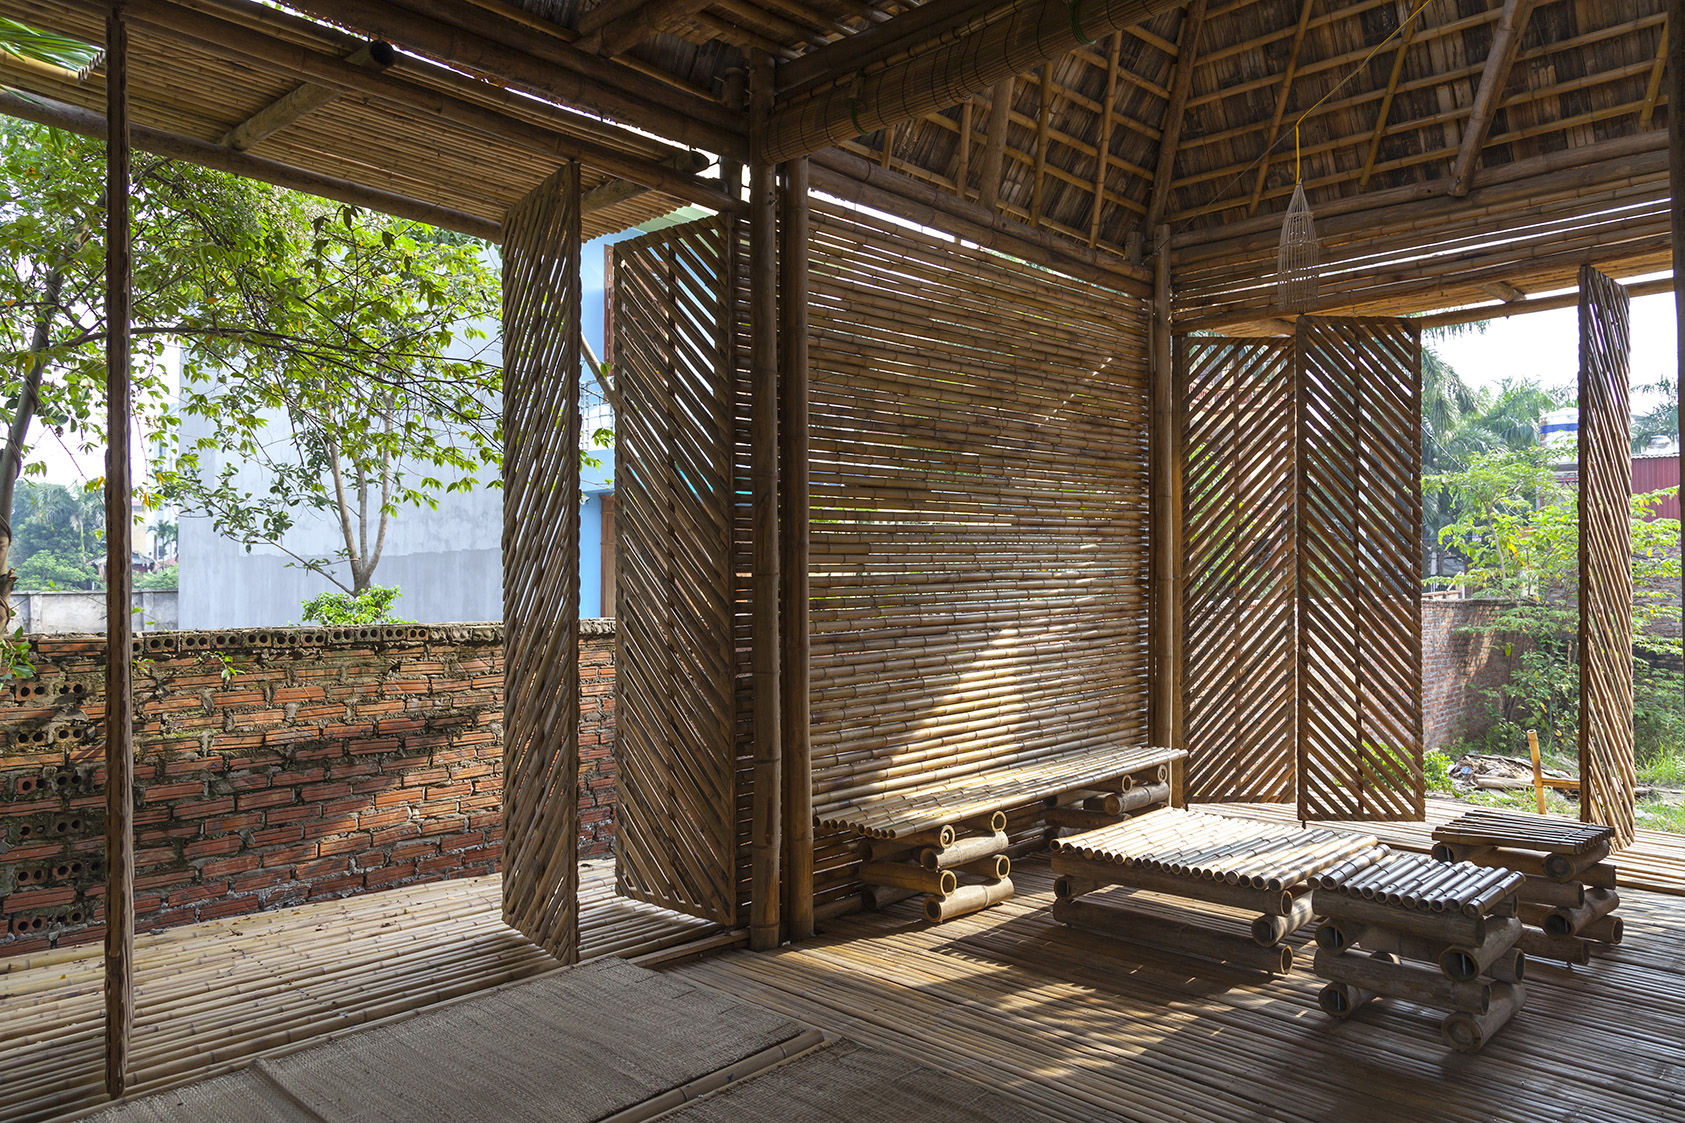 62 H&P Architects Blooming Bamboo Home. Humanitarian Architecture in Vietnam